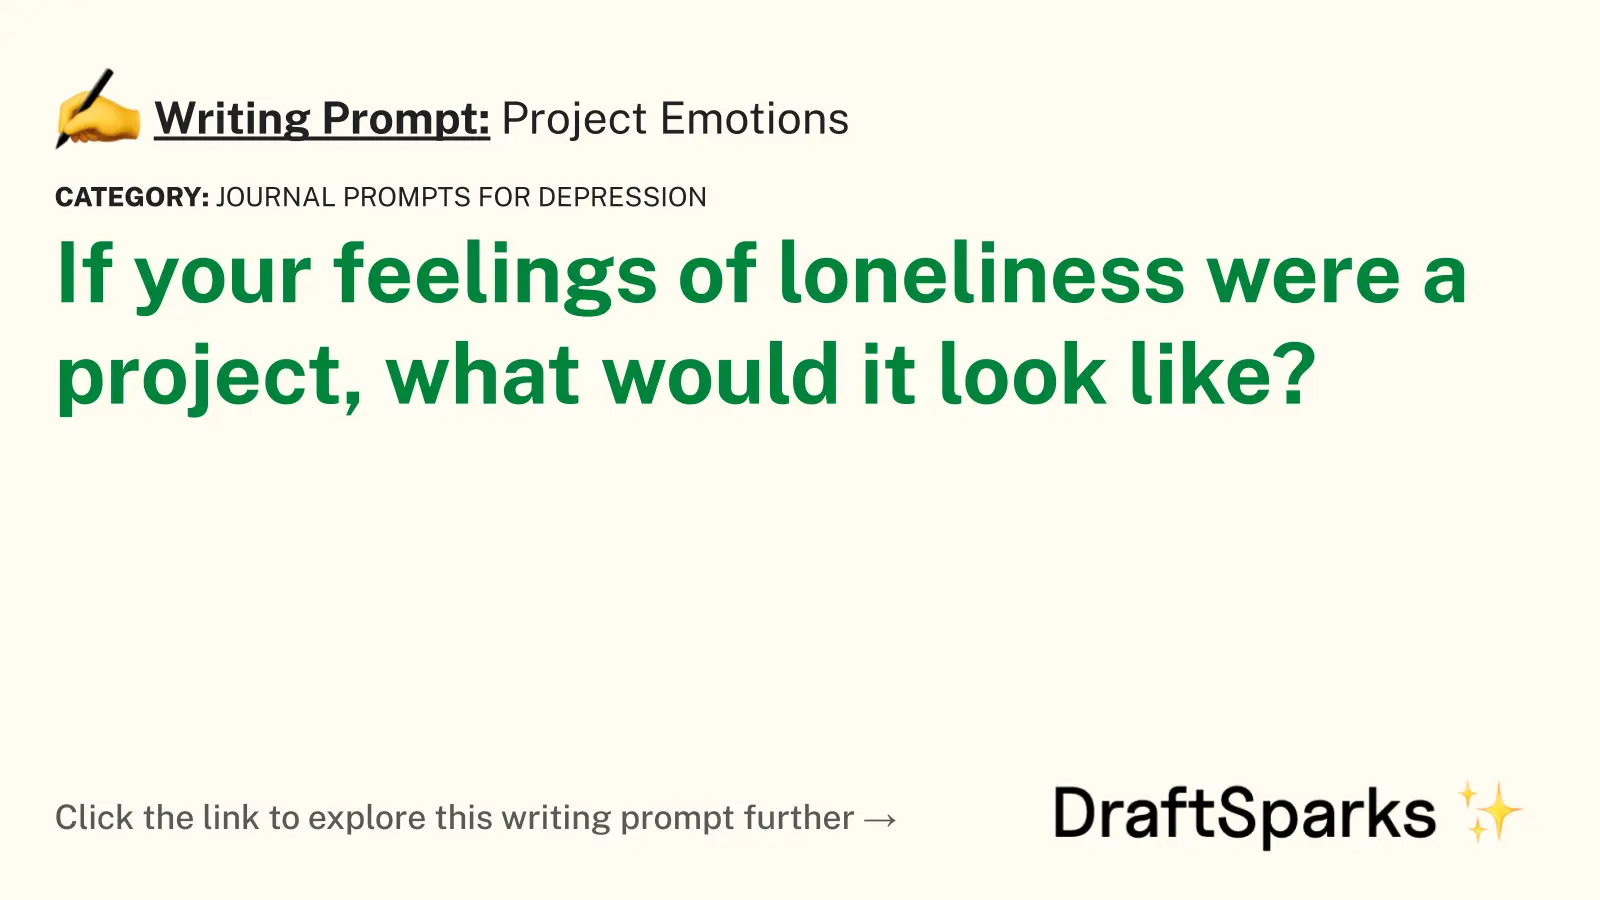 Project Emotions